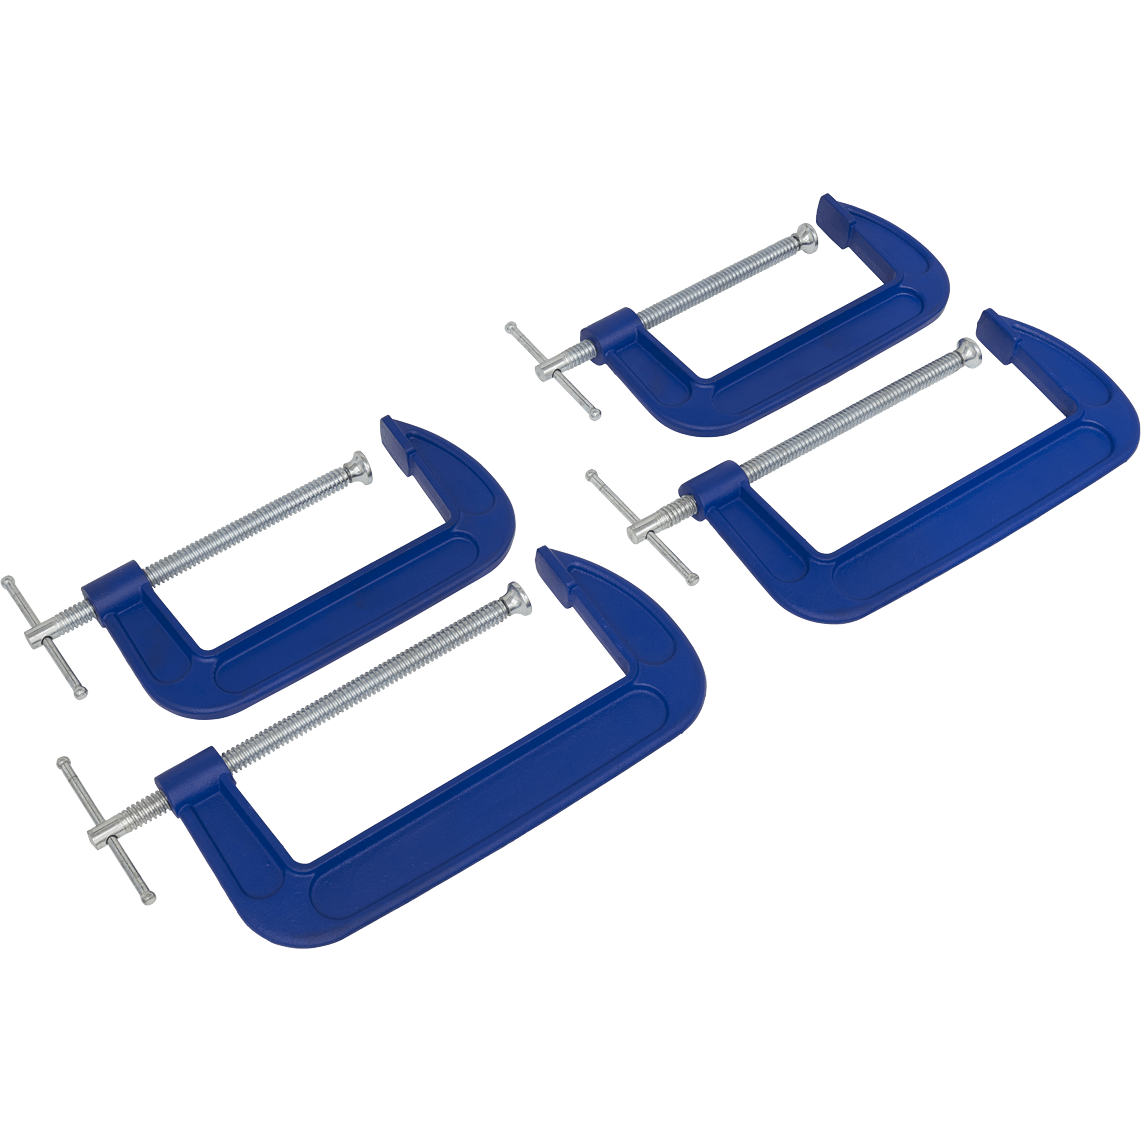 Sealey 4 Piece 150mm and 200mm G Clamp Set